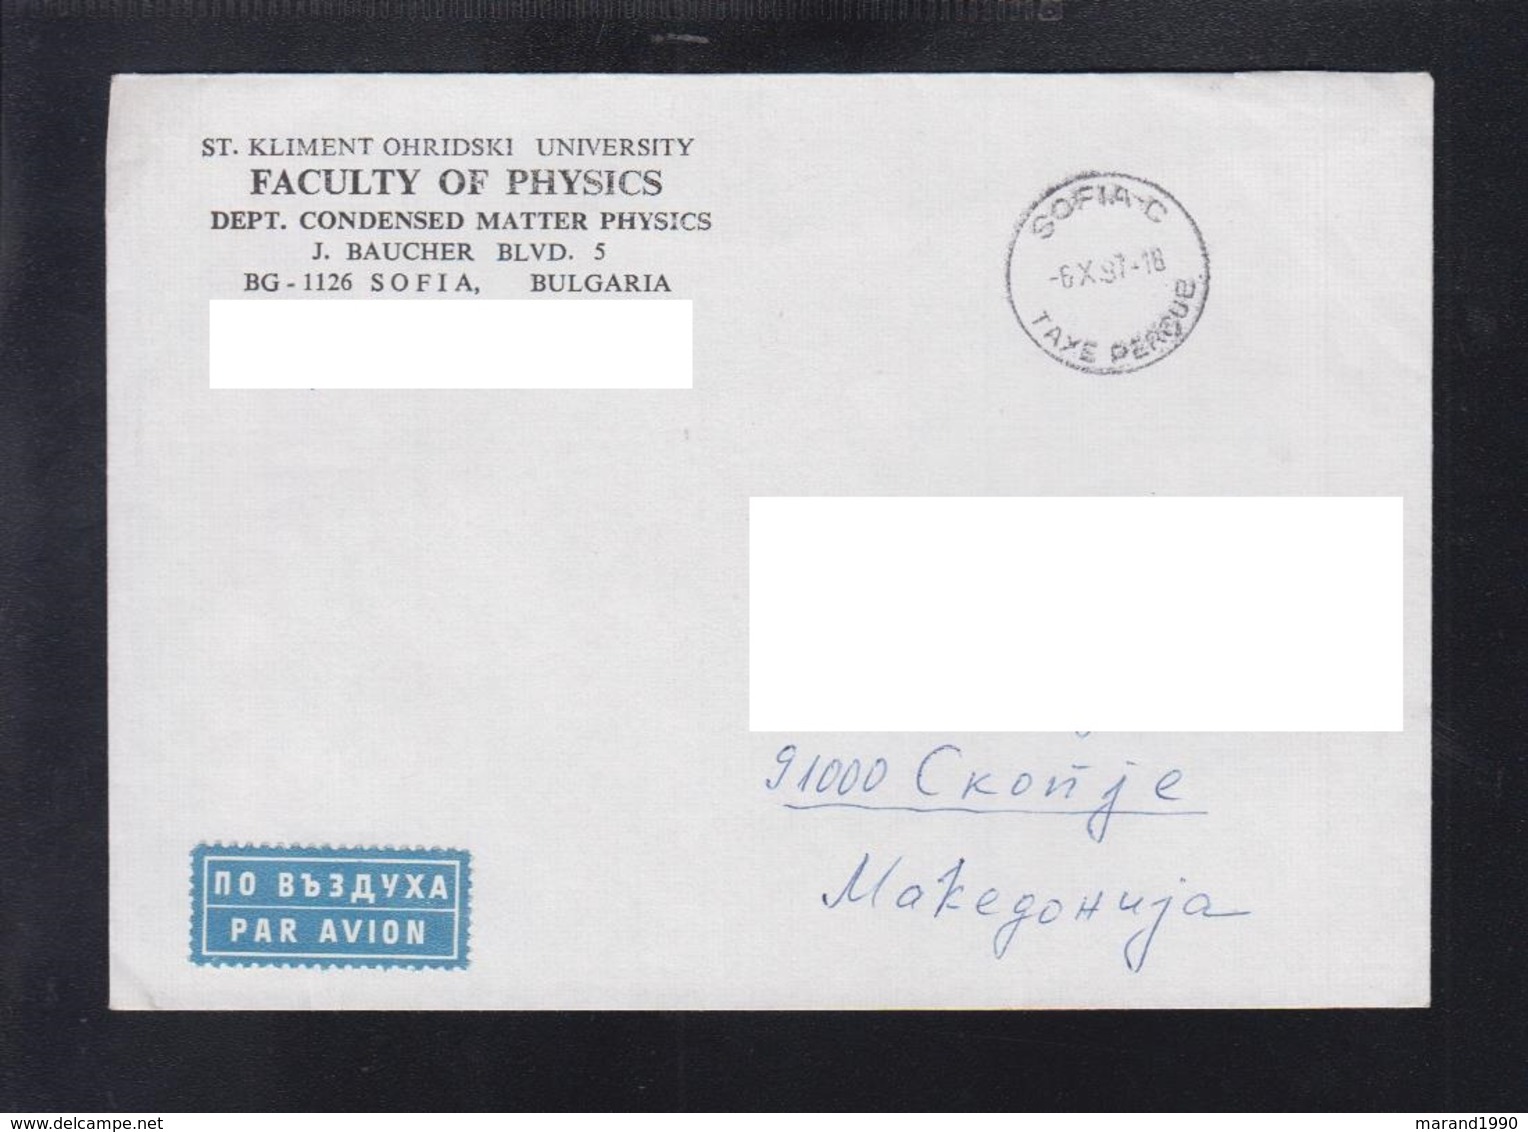 BULGARIA COVER / MACEDONIA ST KLIMENT RELIGION CHRISTIANITY AIR MAIL  ** - Covers & Documents